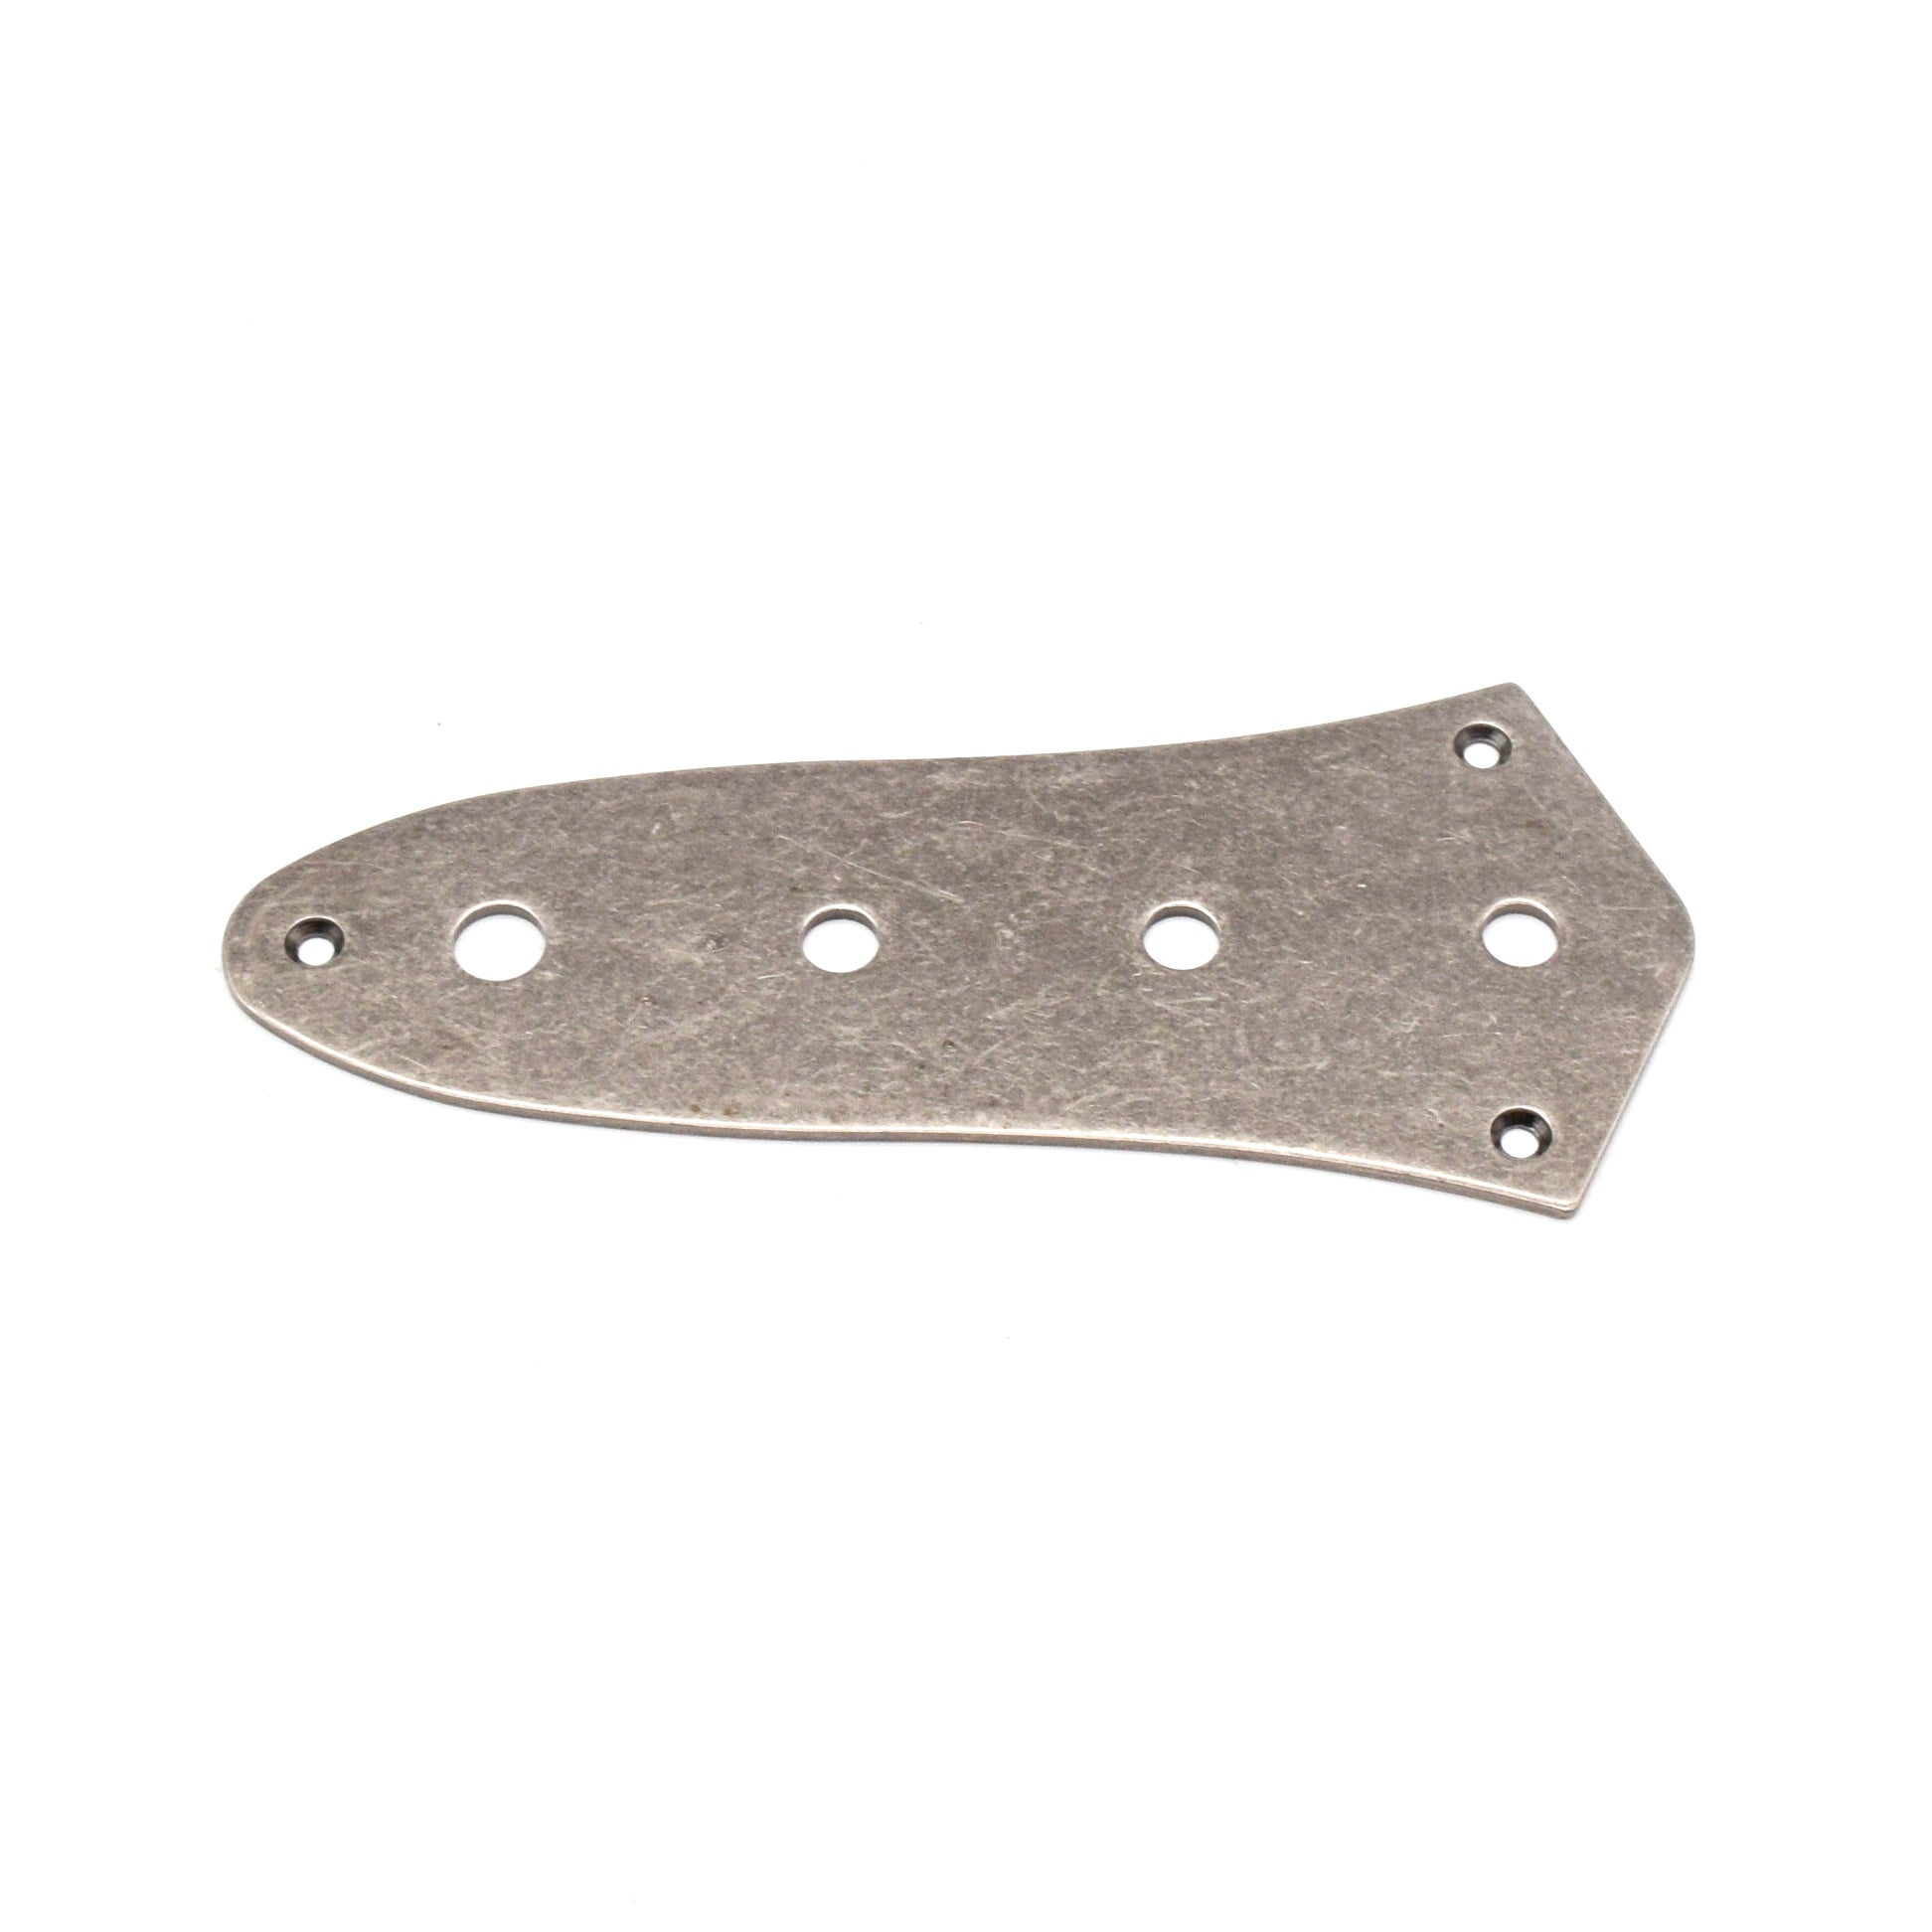 KD By AxLabs Steel J-Bass Style Control Plate, 4-Hole Mount - AxLabs